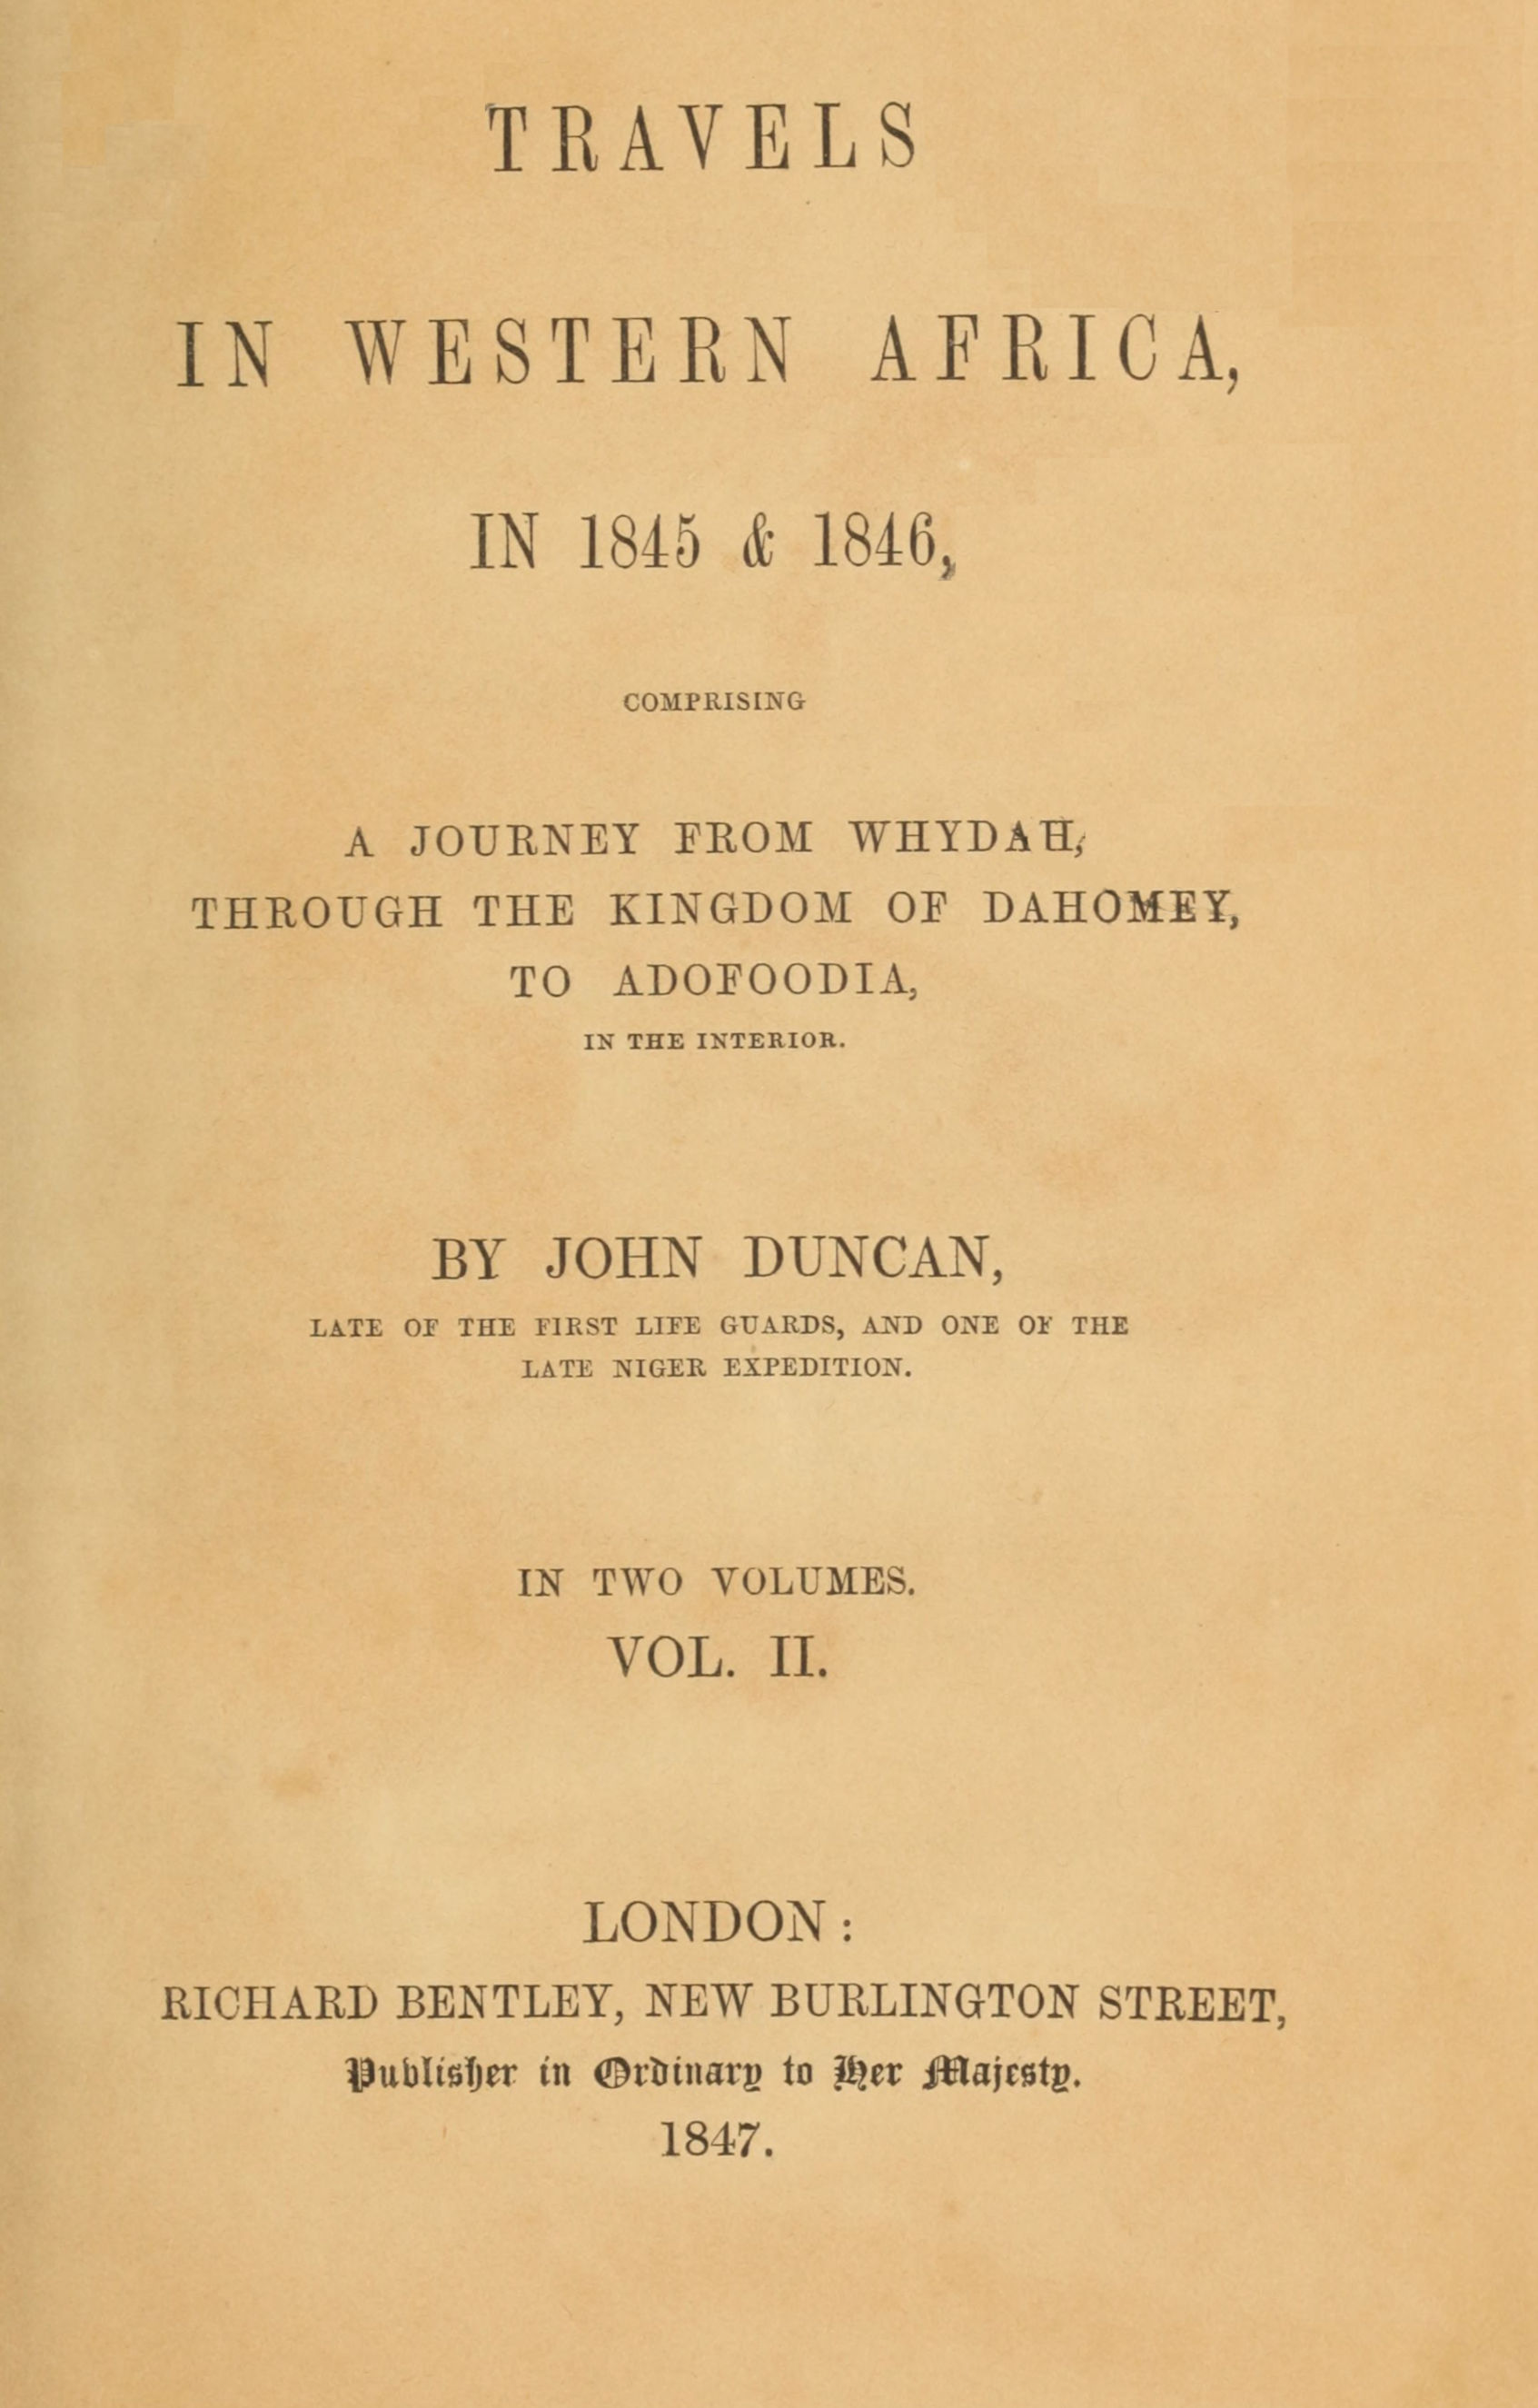 Travels in Western Africa in 1845 & 1846, Volume 2 (of 2)&#10;comprising a journey from Whydah through the Kingdom of Dahomey to Adofoodia in the interior